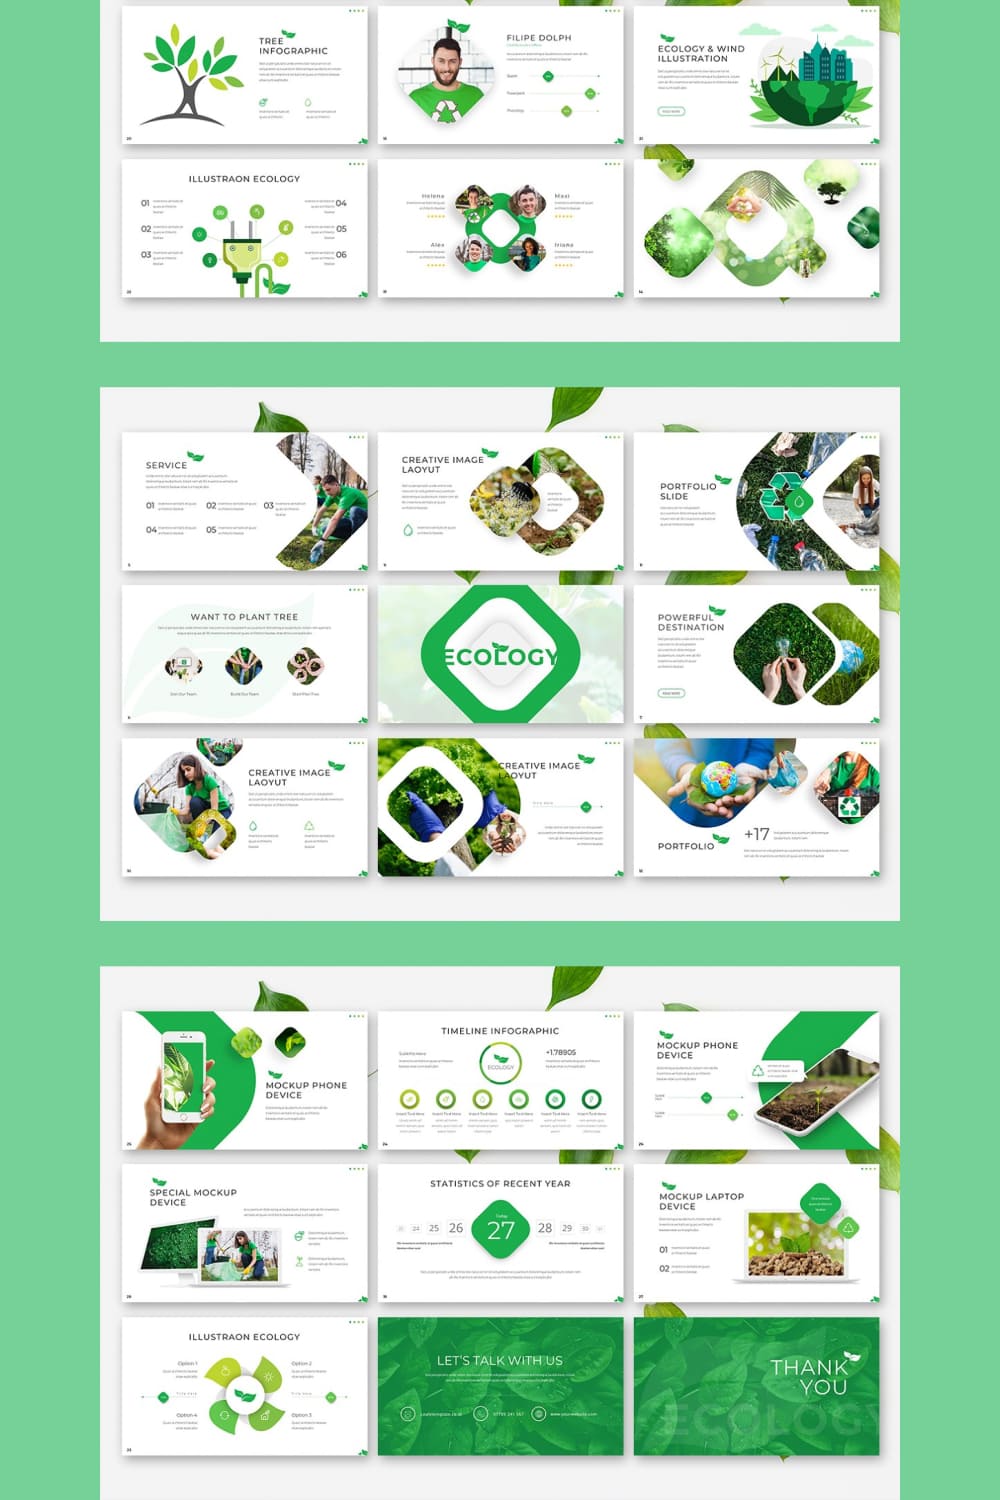 Great template in bright green color.